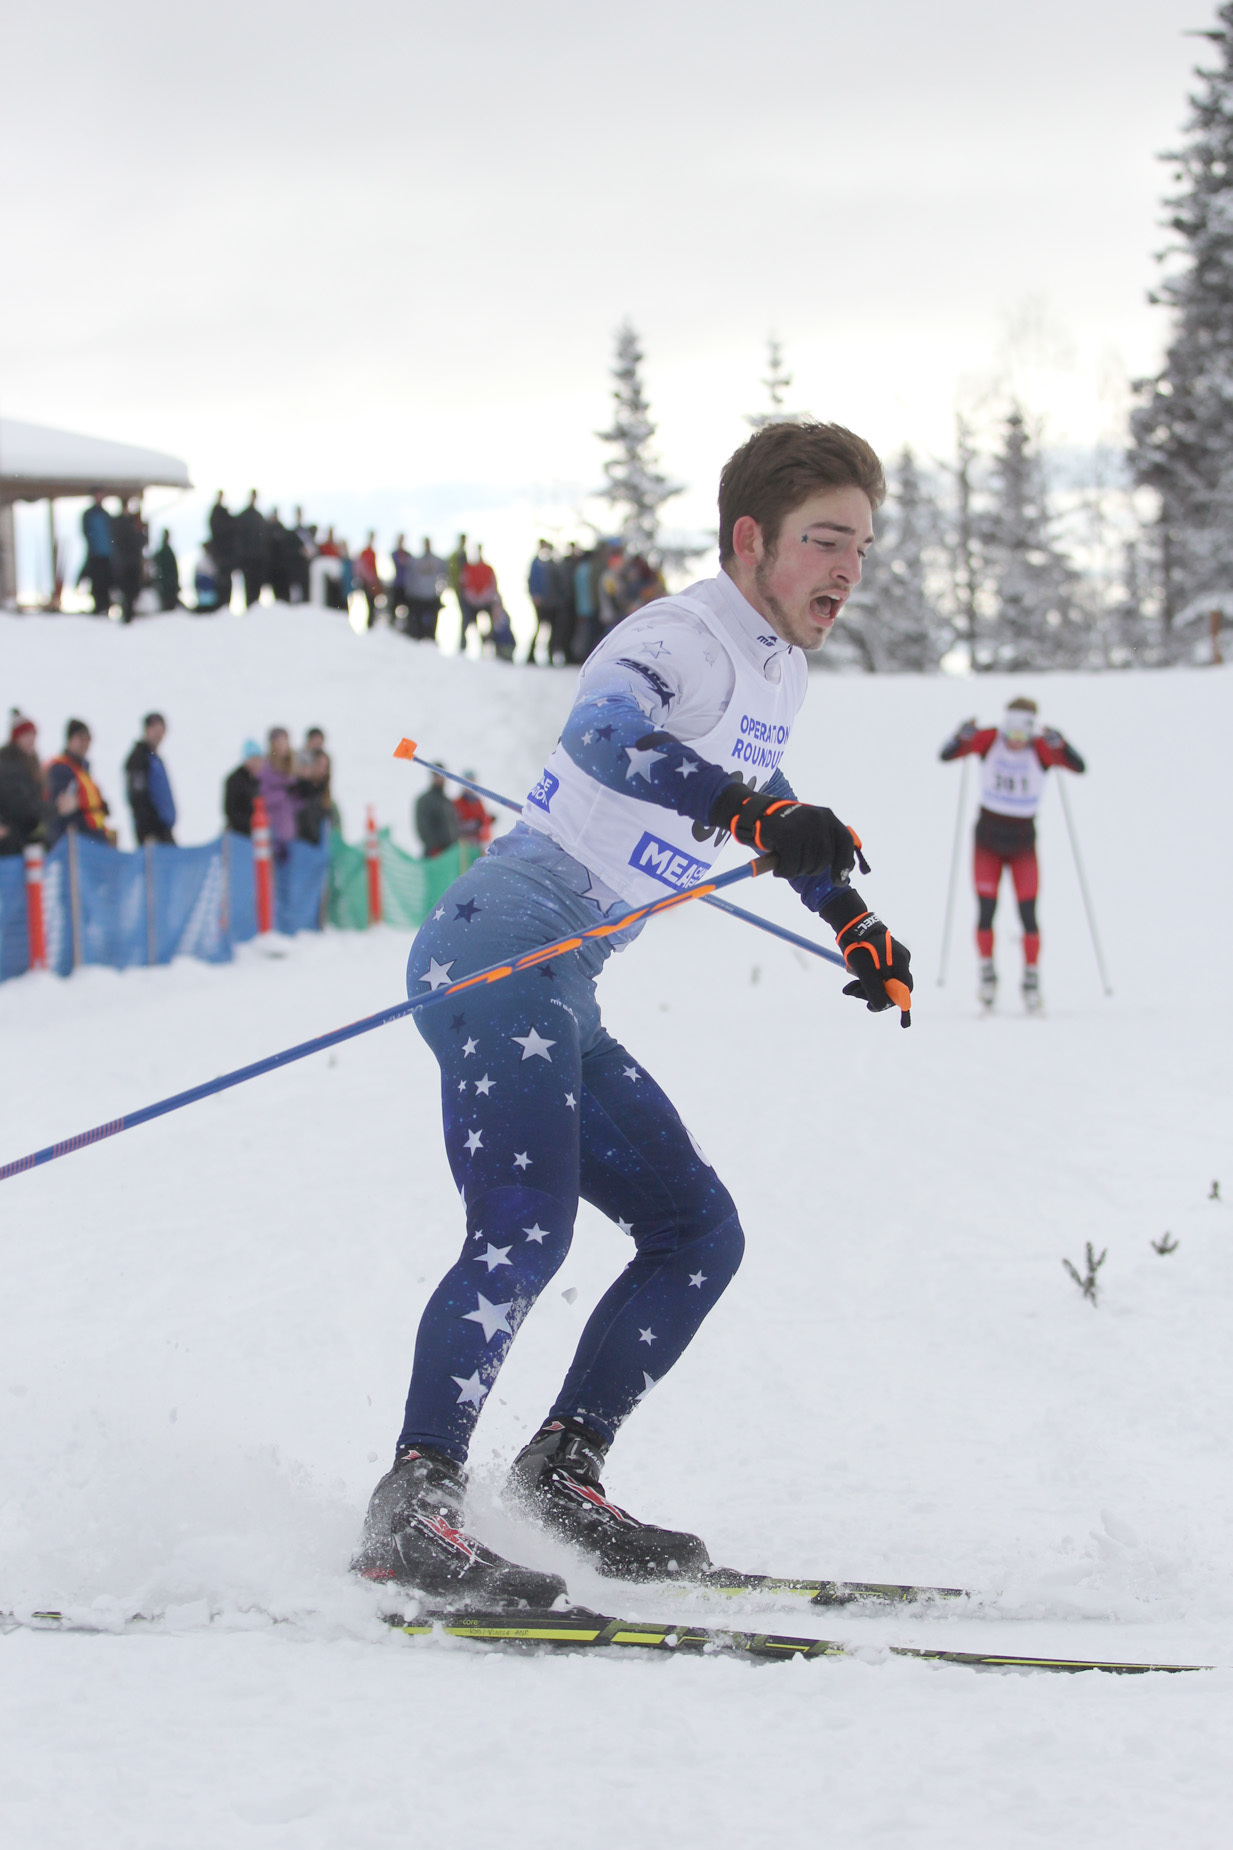 Soldotna’s Koby Vinson round a corner Saturday at the Region III ski meet at Government Peak. (Photo by Caitlin Skvorc/For the Frontiersman)